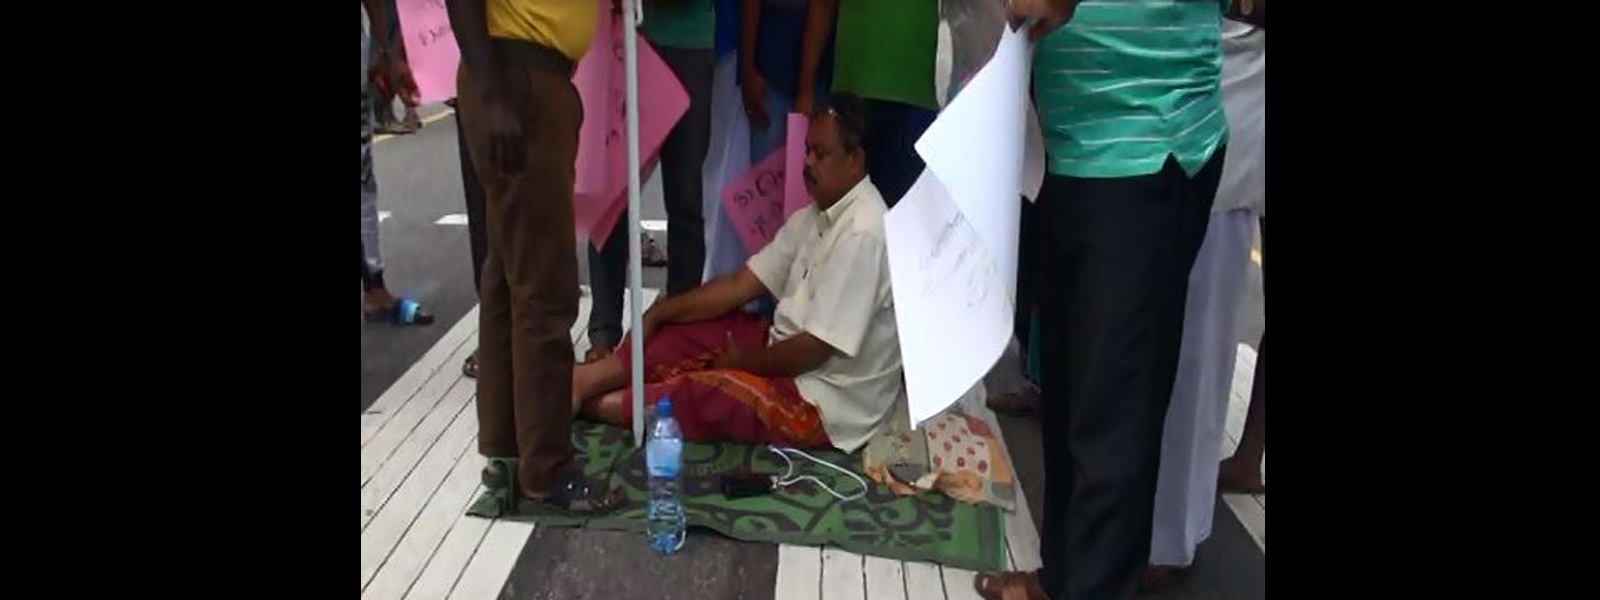 MP Ananda Aluthgamage declared a protest today